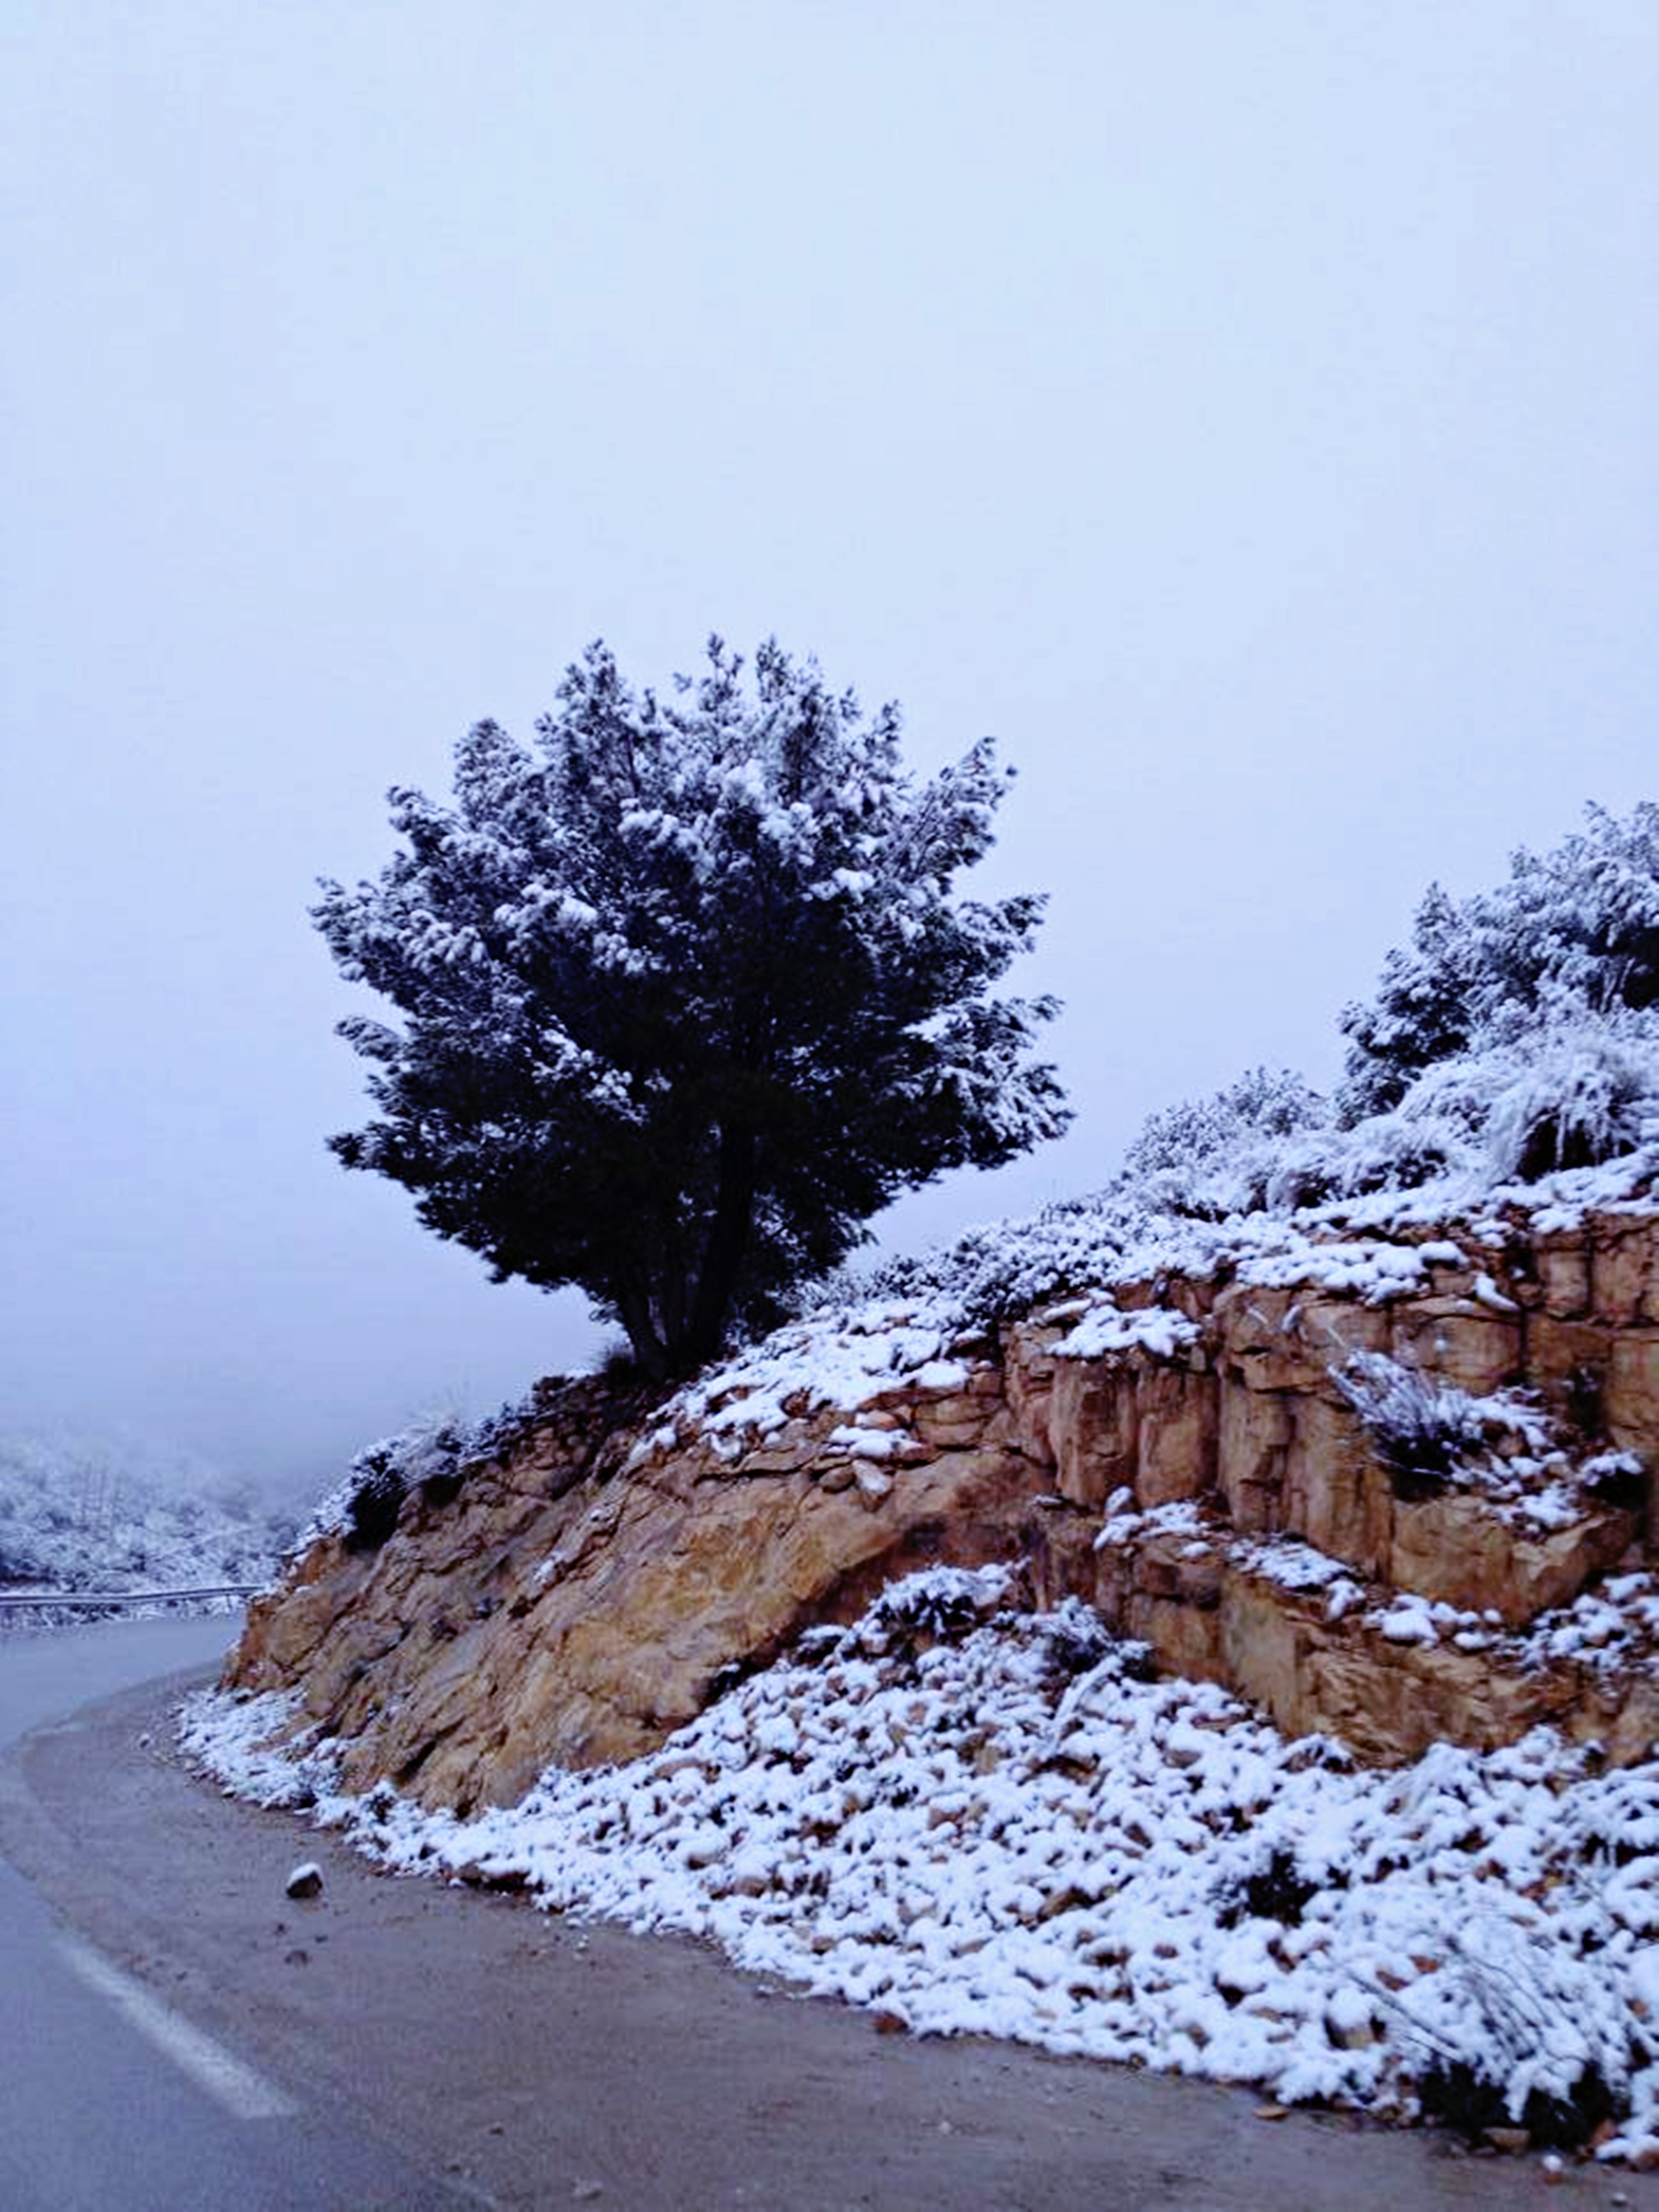 africa, Algeria, Amazigh, Aures, Chaoui, Countryside, Hills, Houses, Landscapes, Mountains, Nature, North, Snow, Tebessa, Town, Winter, Cheria, Trees, Rocks, Road Wallpaper